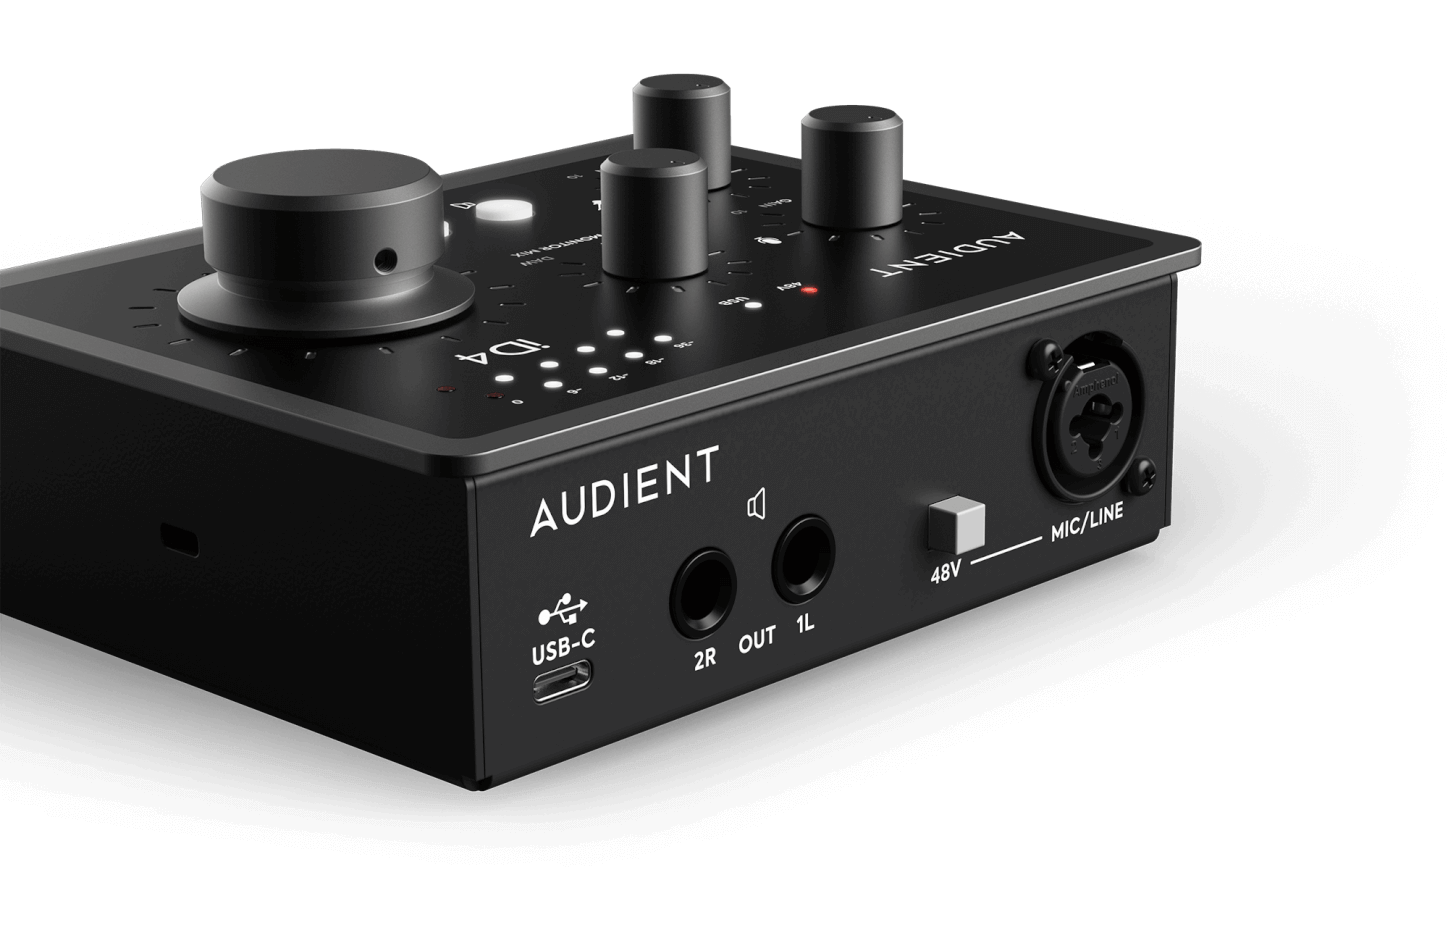 Two XLR/¼” JFET instrument/microphone inputs and both ¼” and ⅛” headphone outputs give you all the inputs and outputs you need to record vocals.